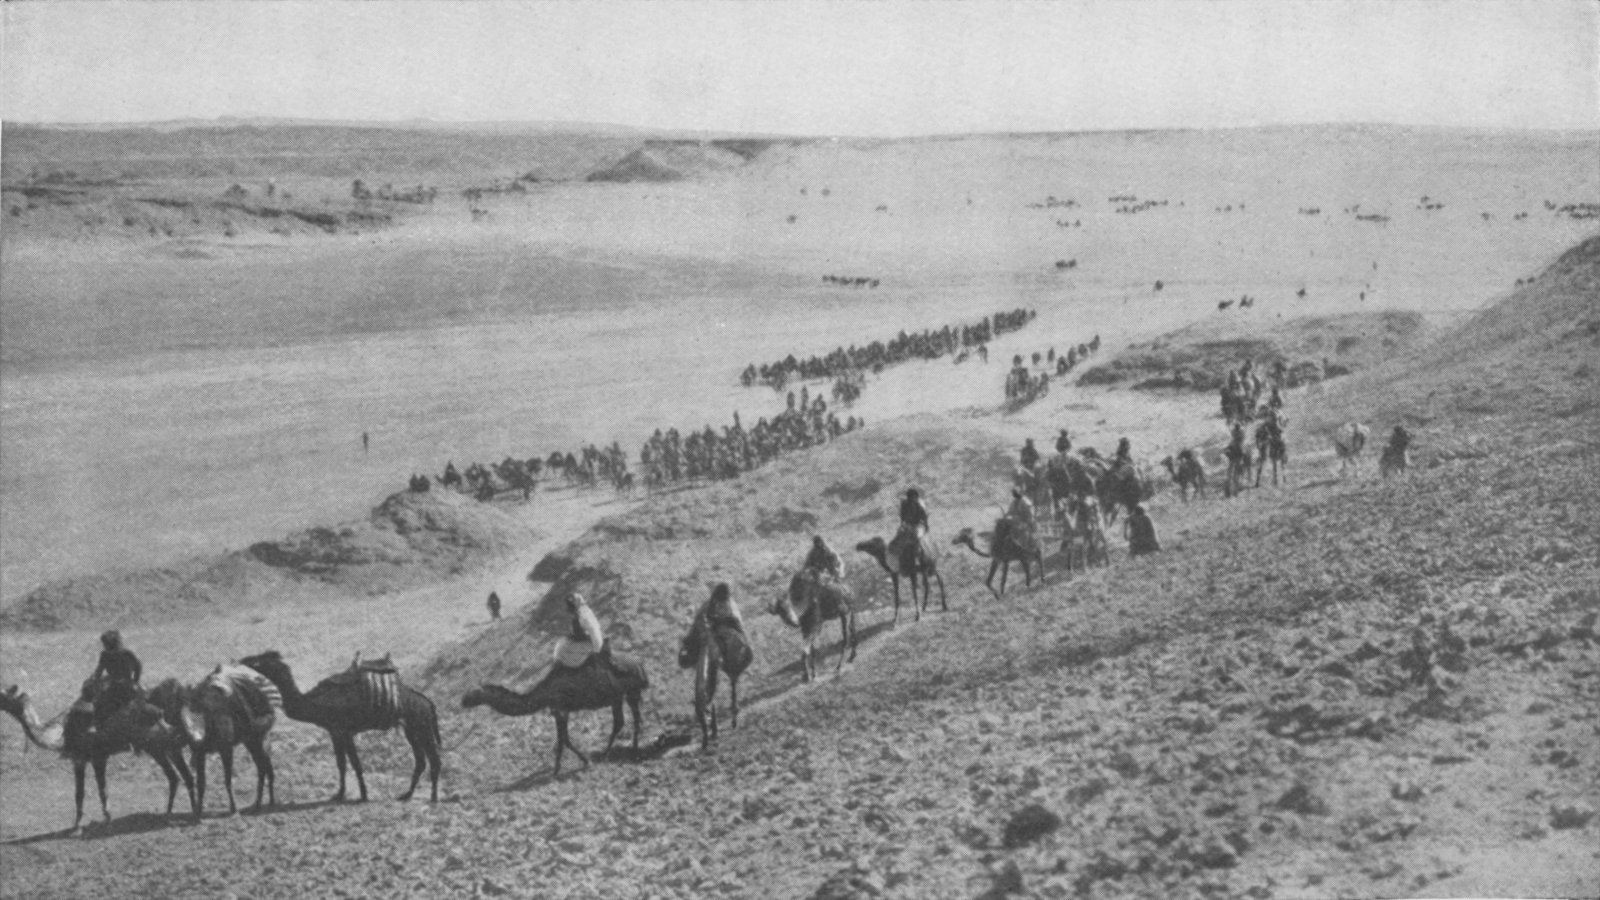 Photo wide shot of large troop of people on camels